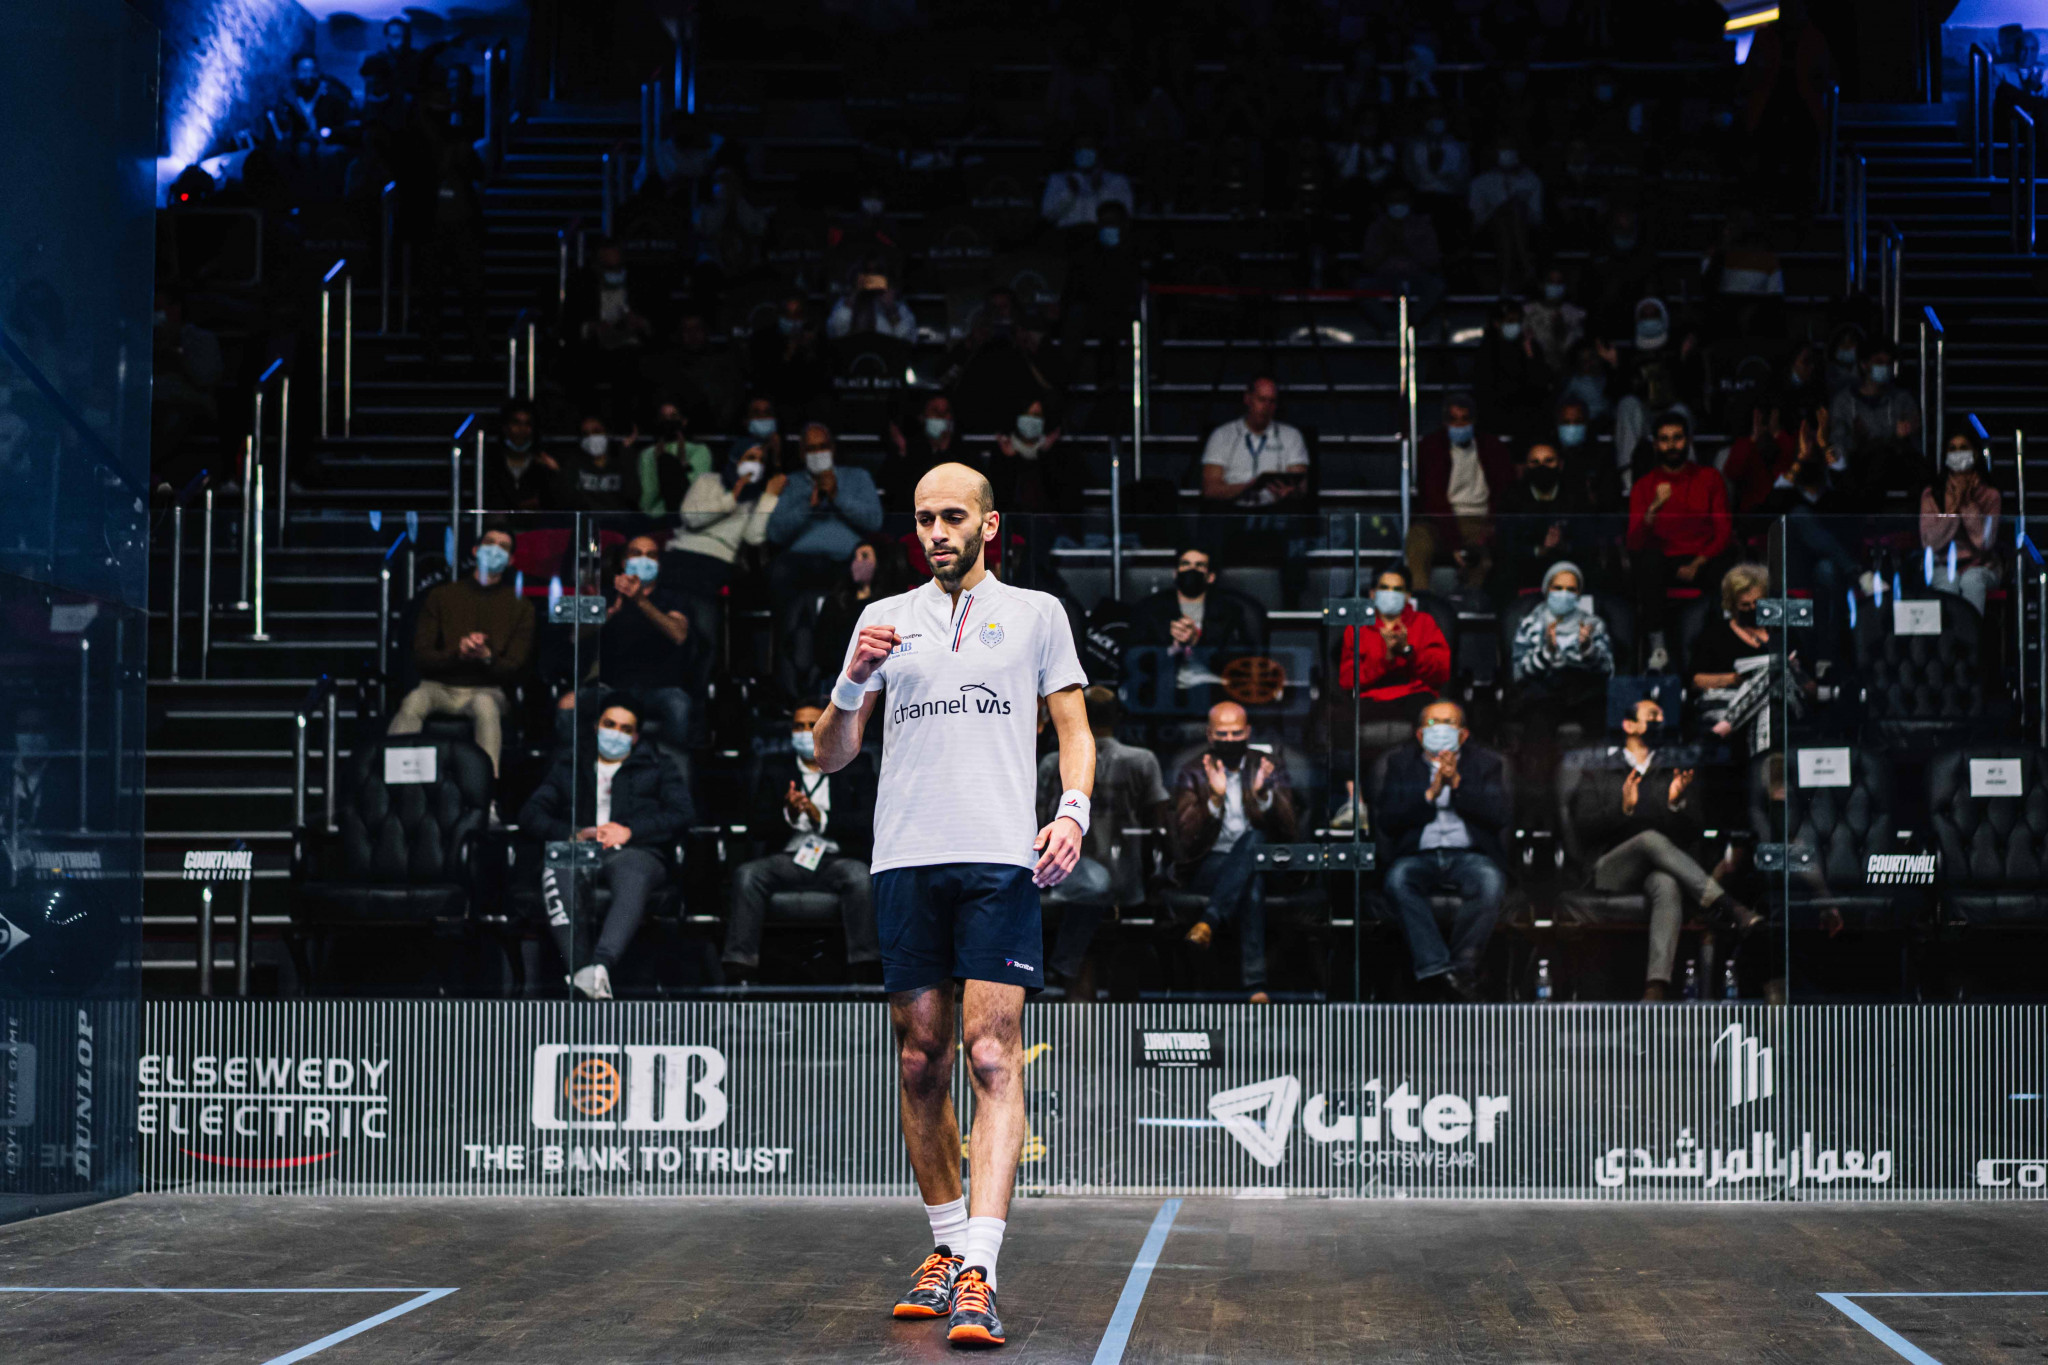 Sixth seed Marwan ElShorbagy will face compatriot Fares Dessouky in tomorrow's Black Ball Squash Open final ©PSA